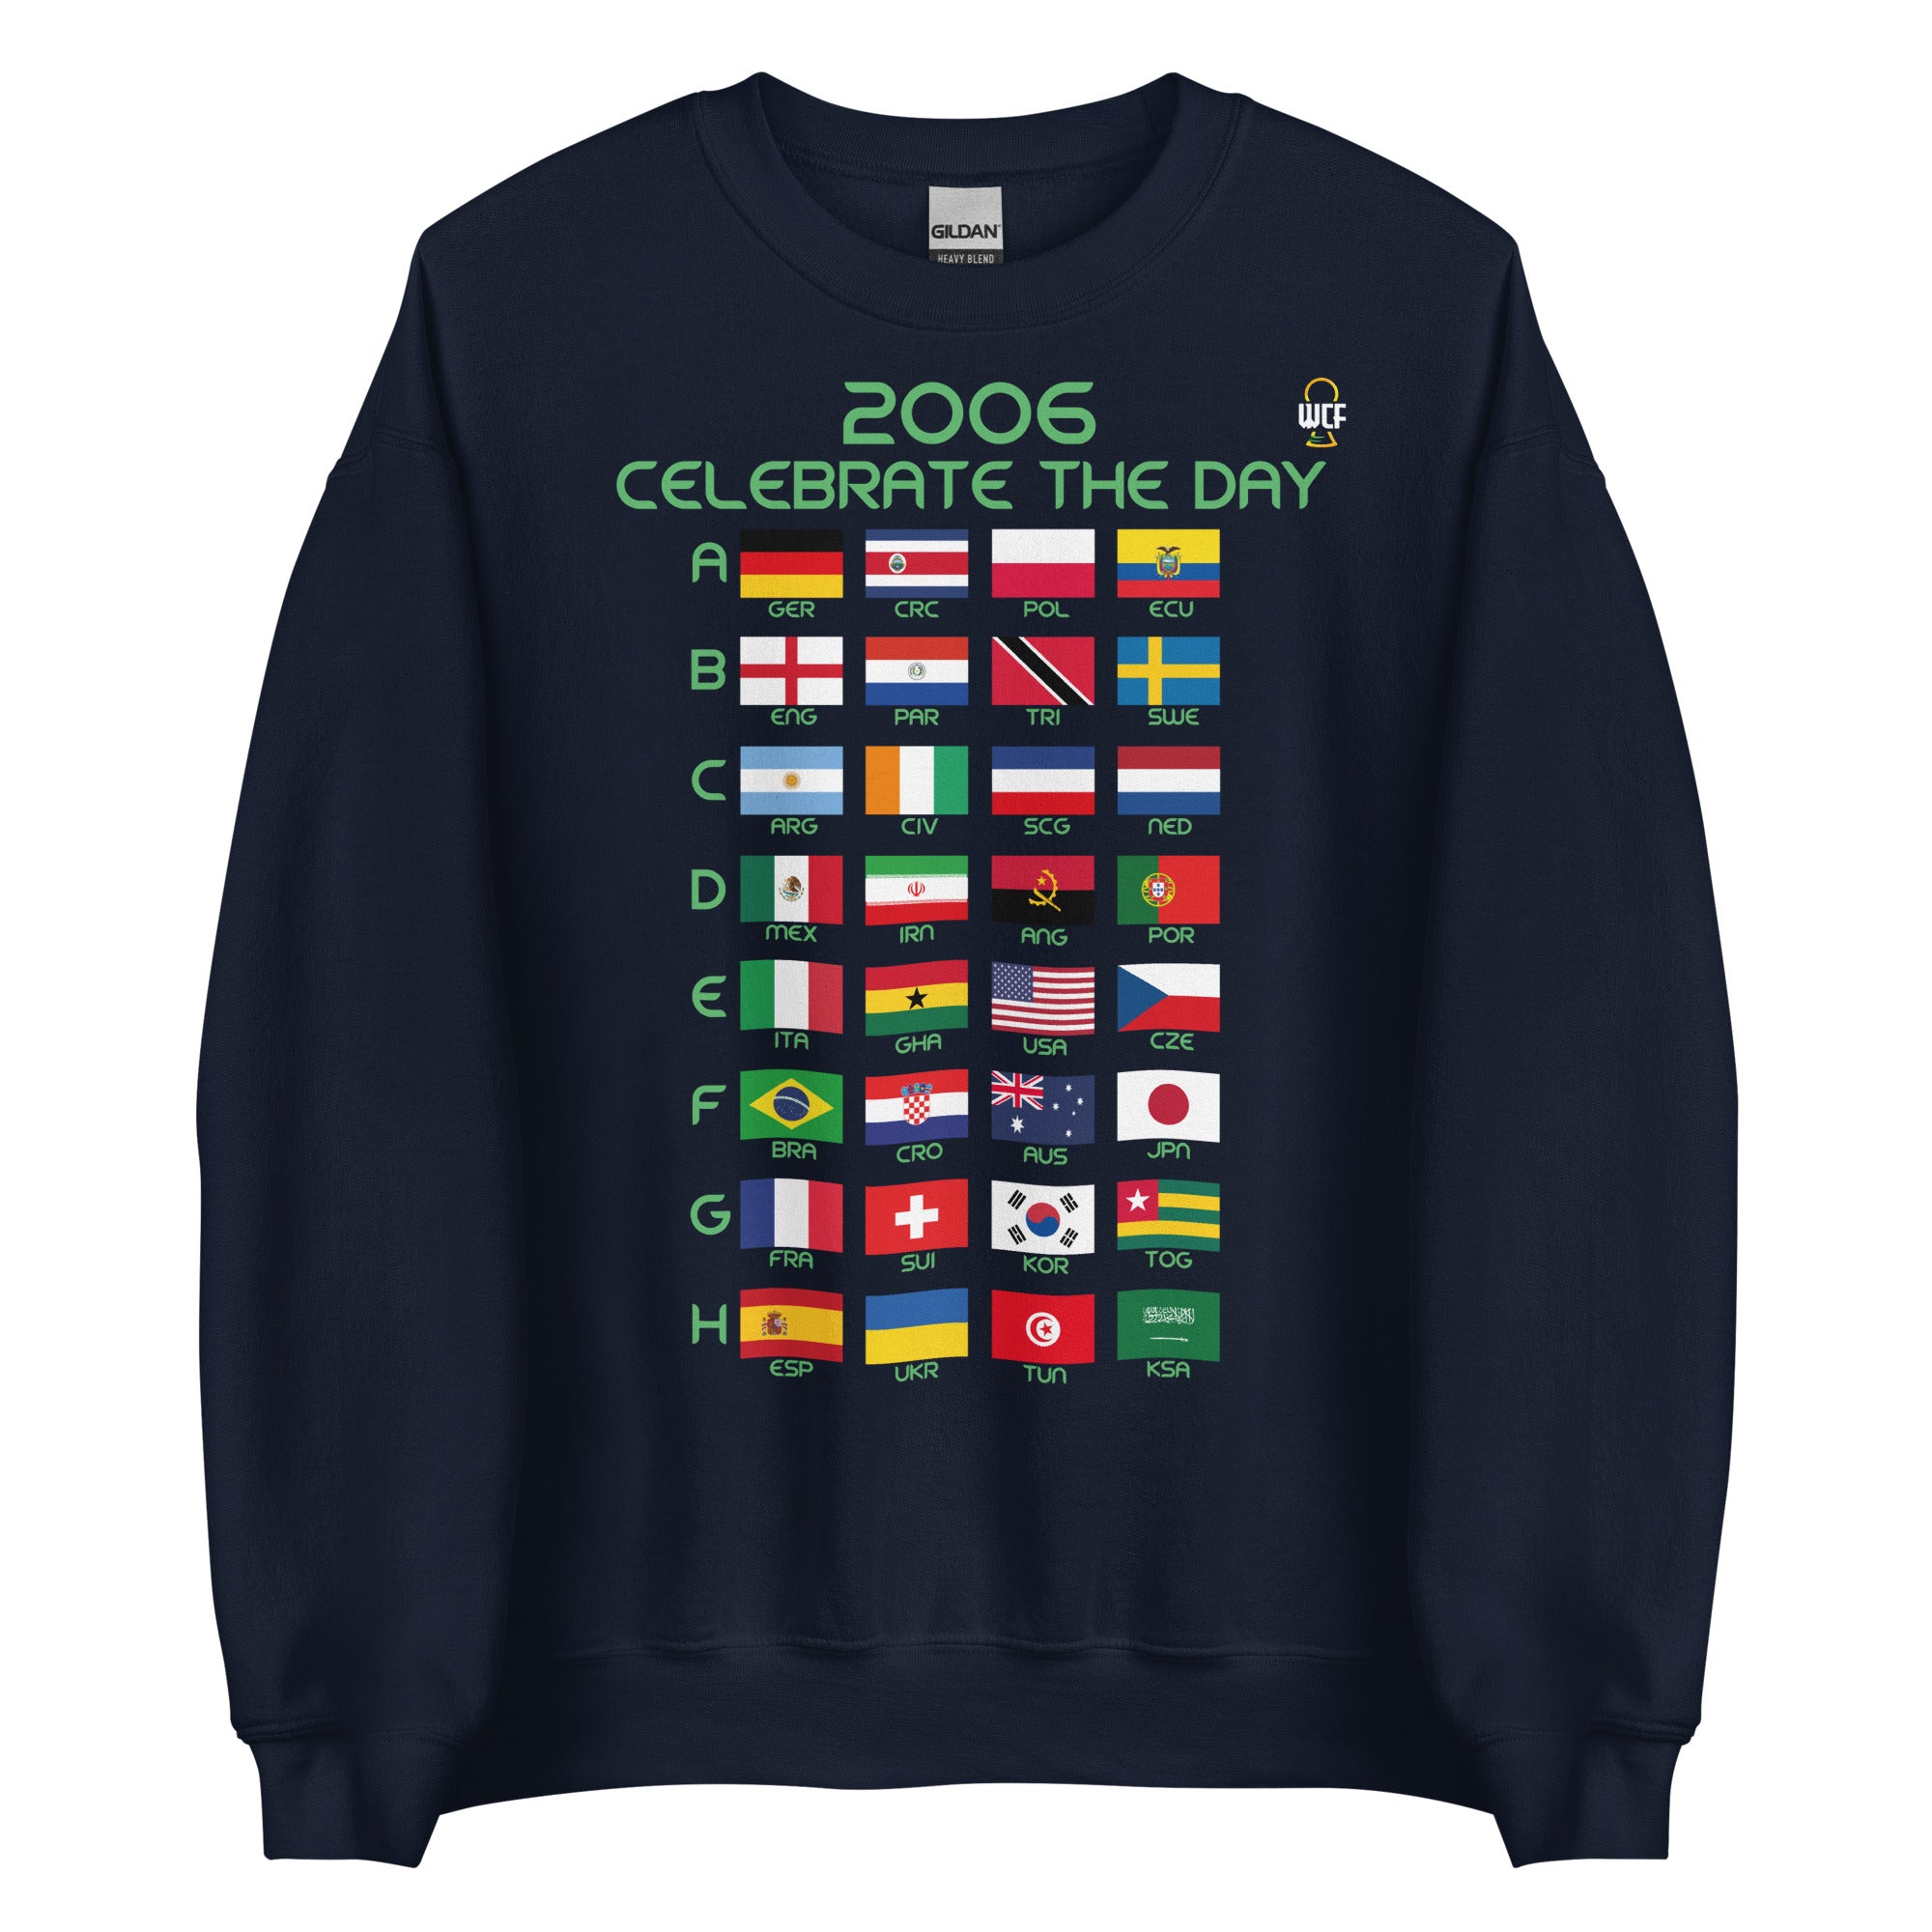 FIFA World Cup Germany 2006 Sweatshirt - Celebrate the Day